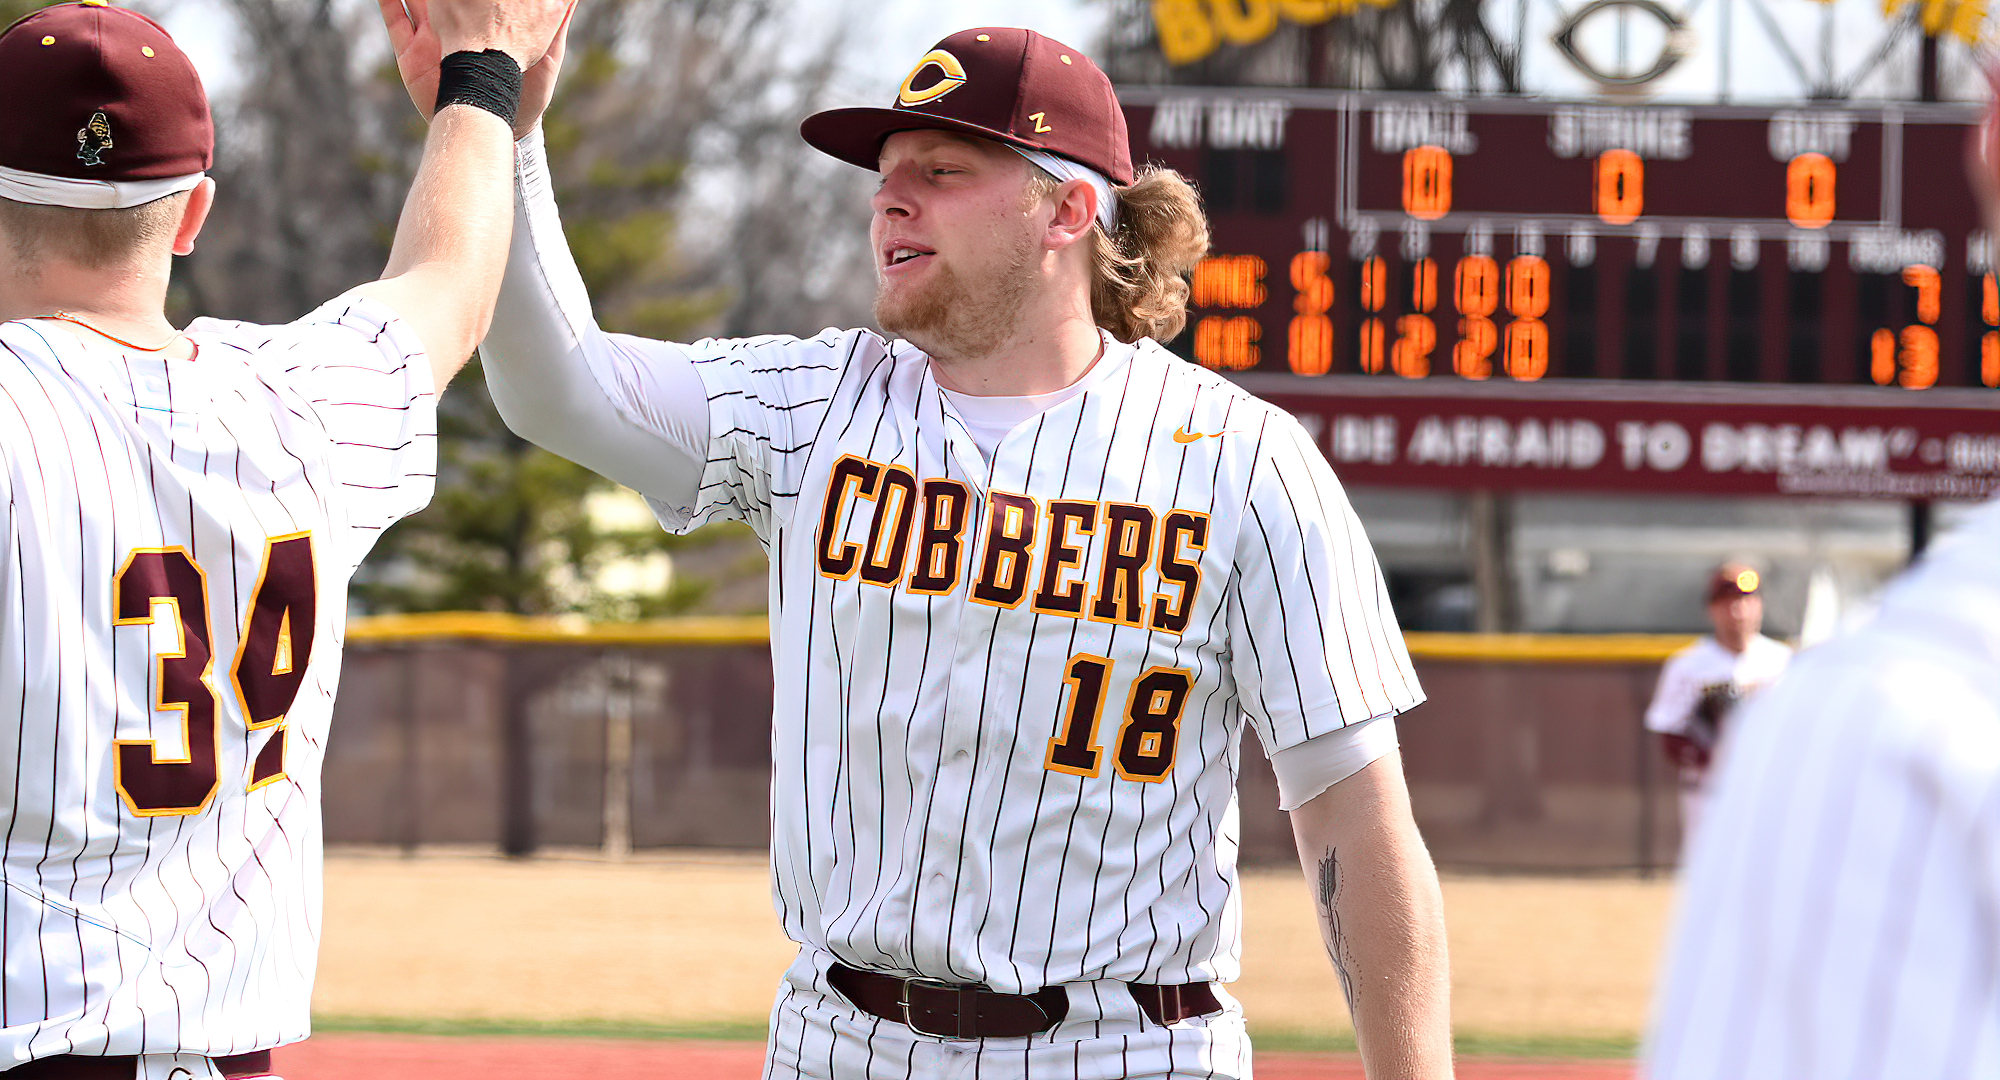 Isaac Henkemeyer-Howe gives out high-fives during the Cobbers' sweep over Macalester. He went 6-for-8 with 8 RBI and a homer in the series.